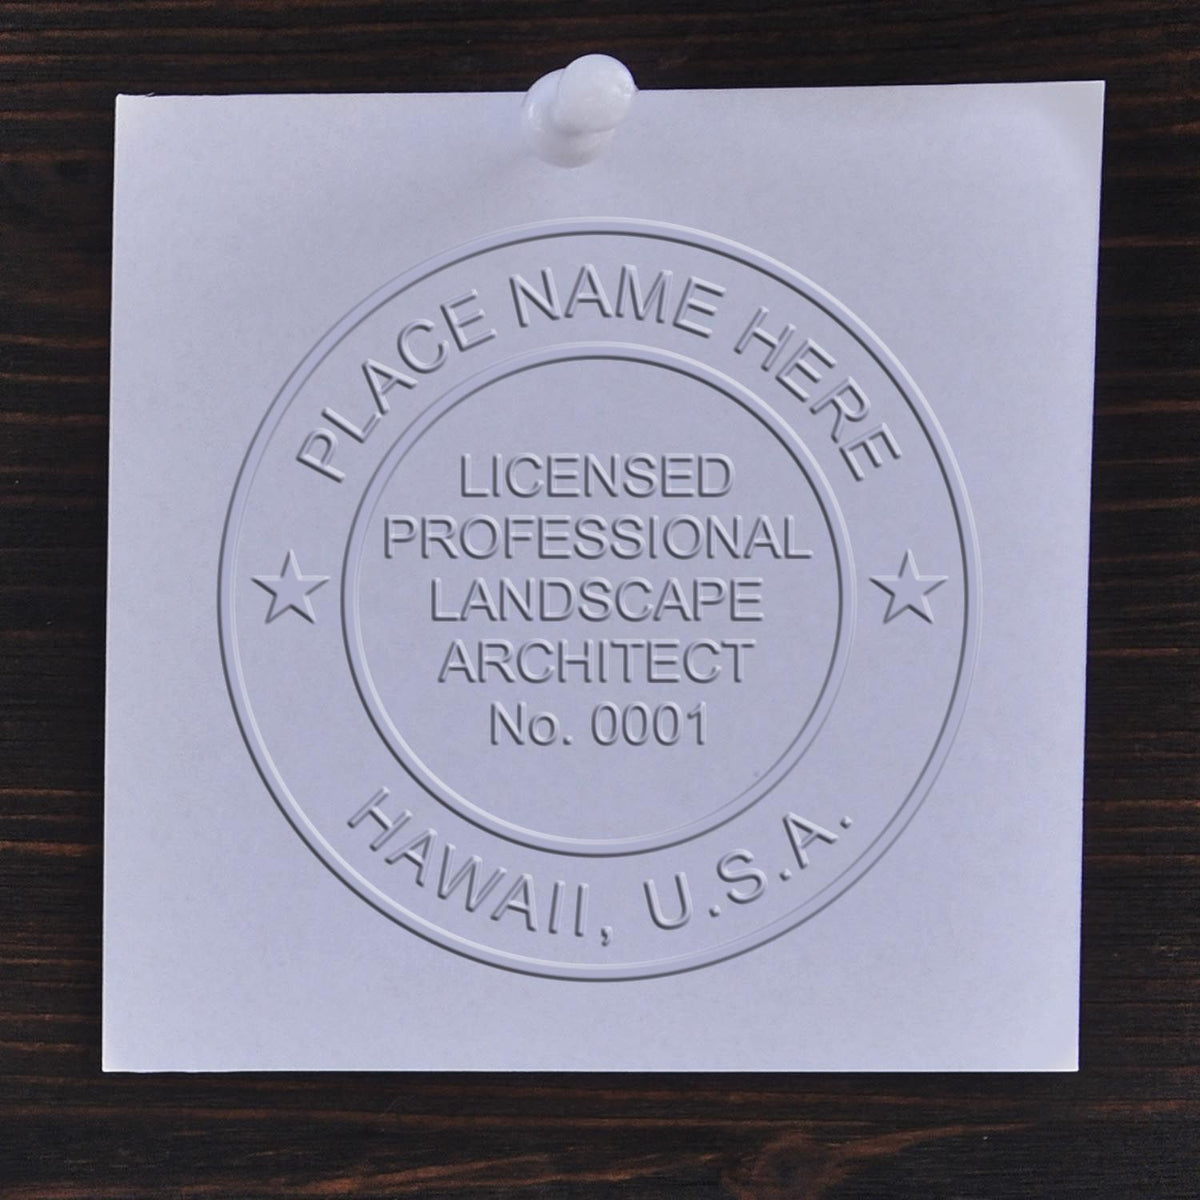 The Gift Hawaii Landscape Architect Seal stamp impression comes to life with a crisp, detailed image stamped on paper - showcasing true professional quality.